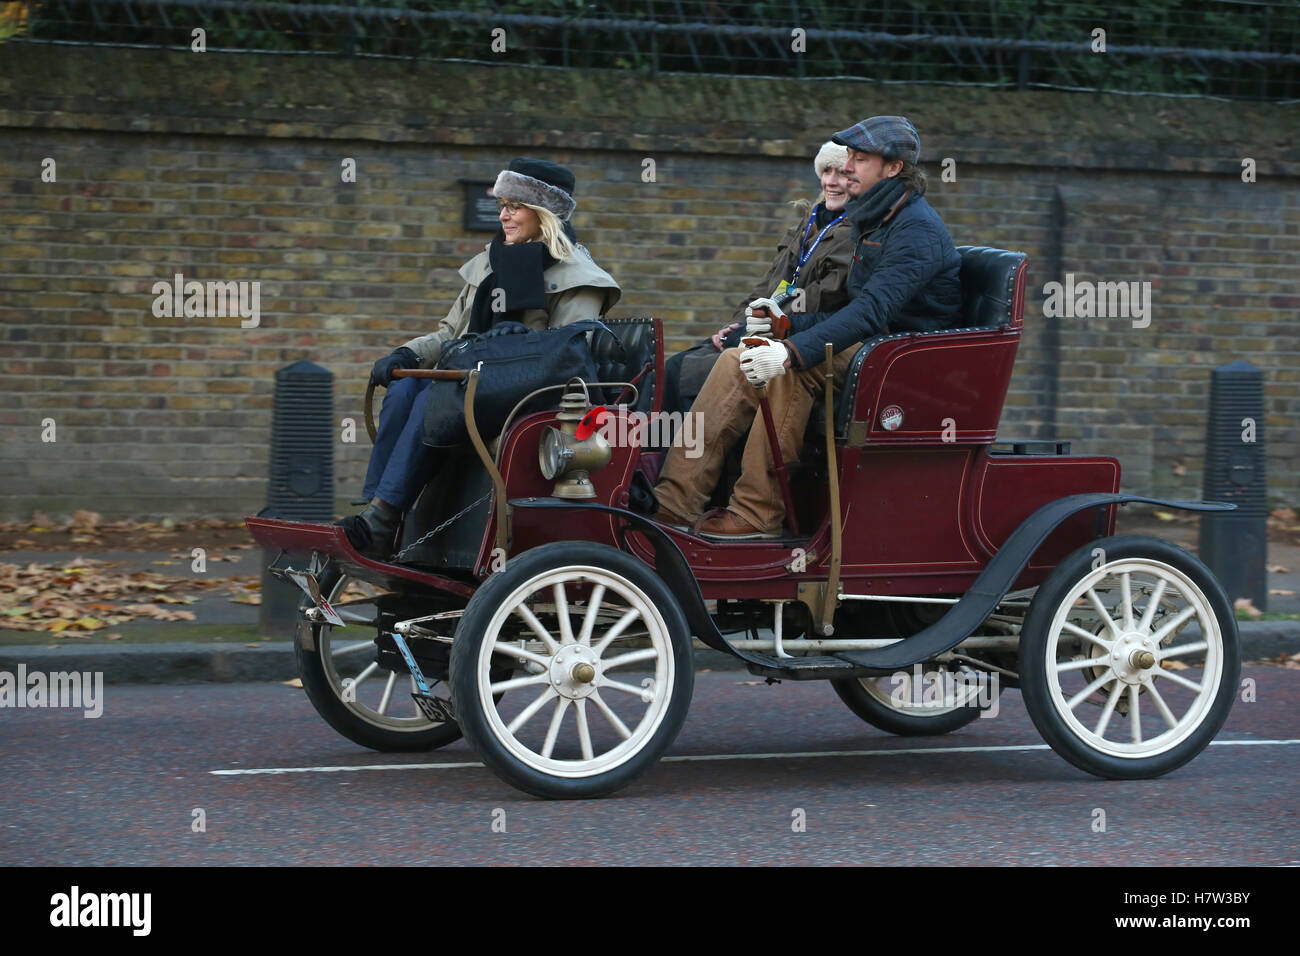 Duryea Car High Resolution Stock Photography and Images - Alamy